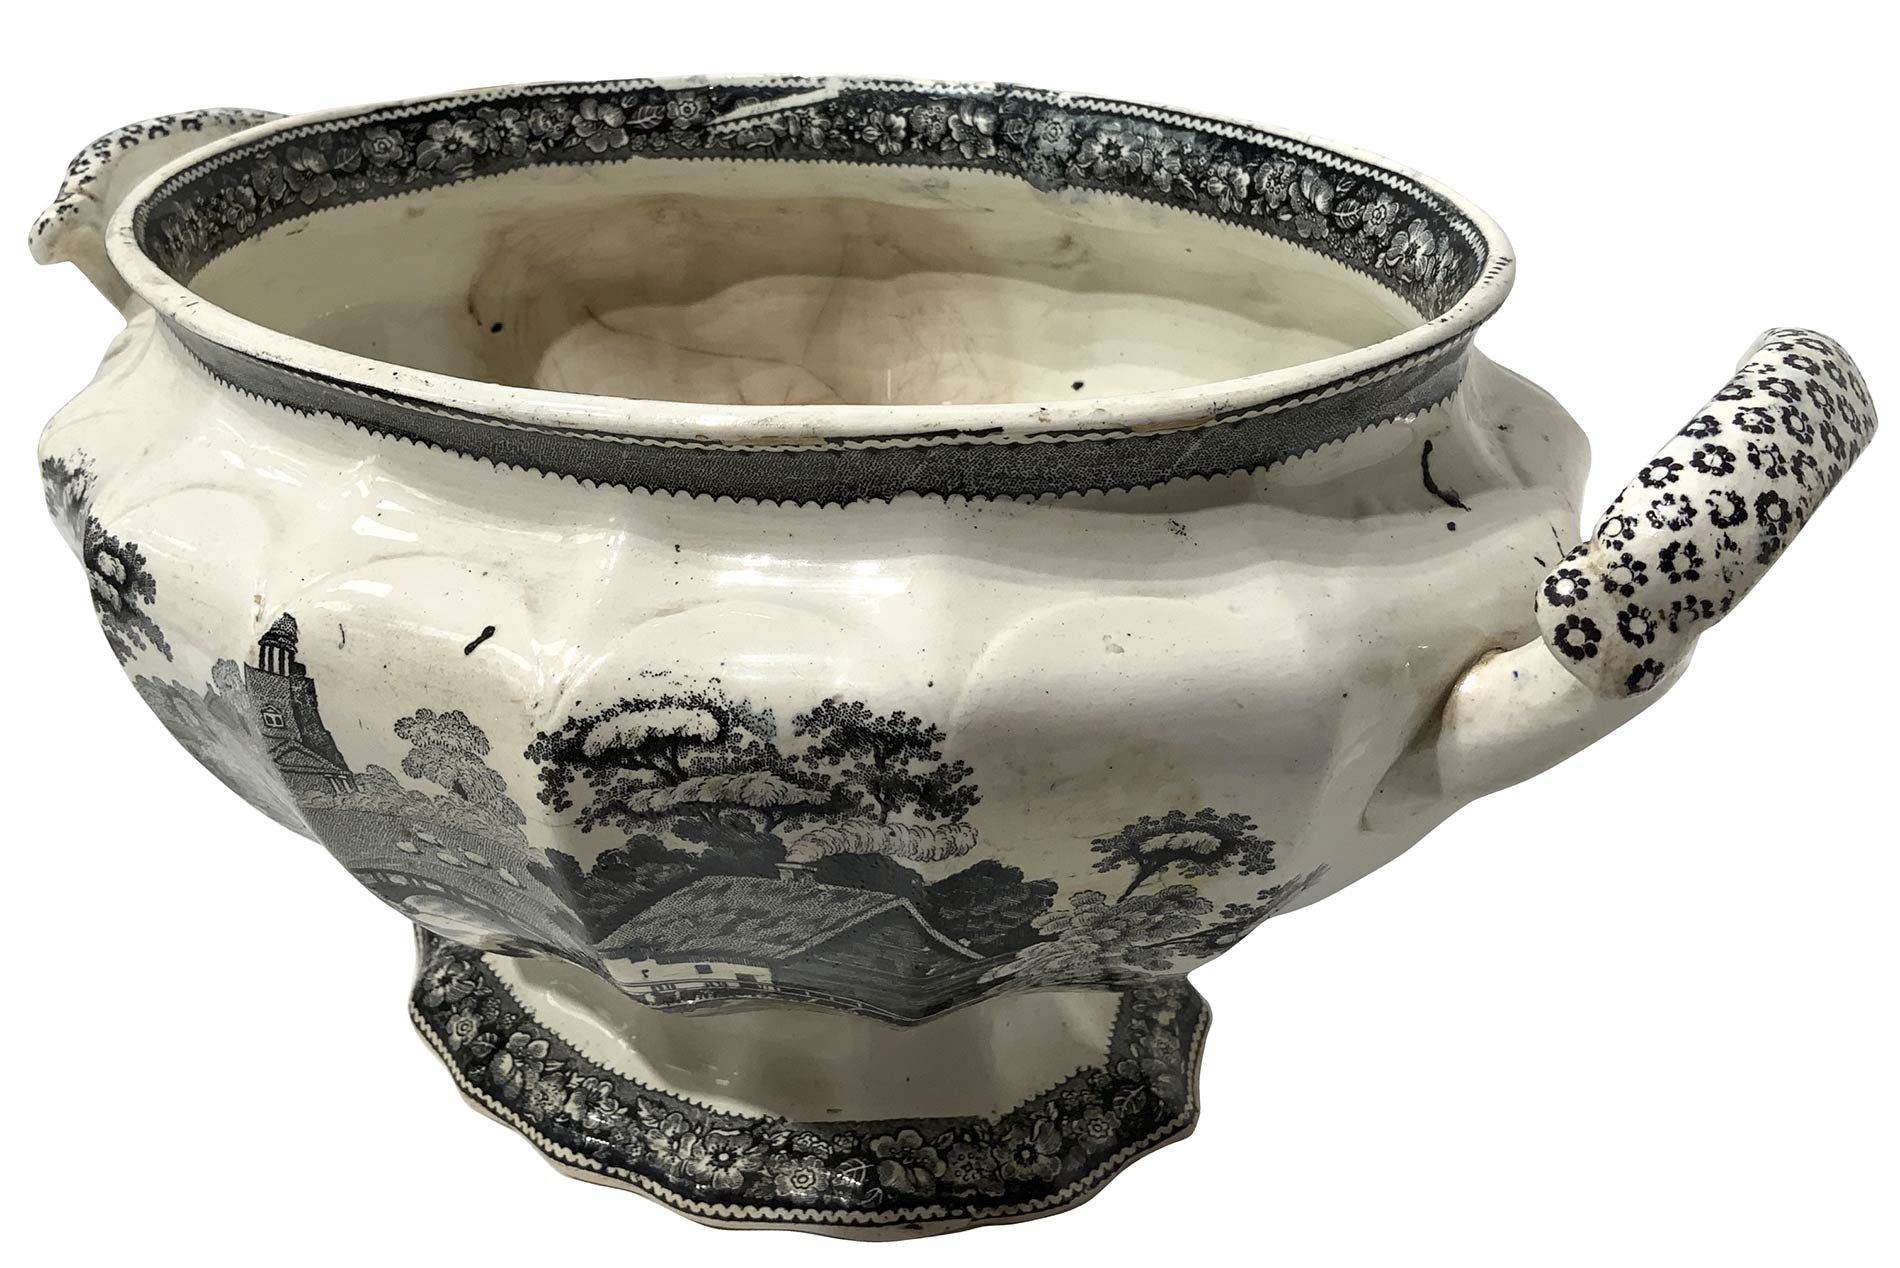 Tureen with landscapes in the colors of white and gray, England, XX century. H cm 30x 38x32. - Image 3 of 7